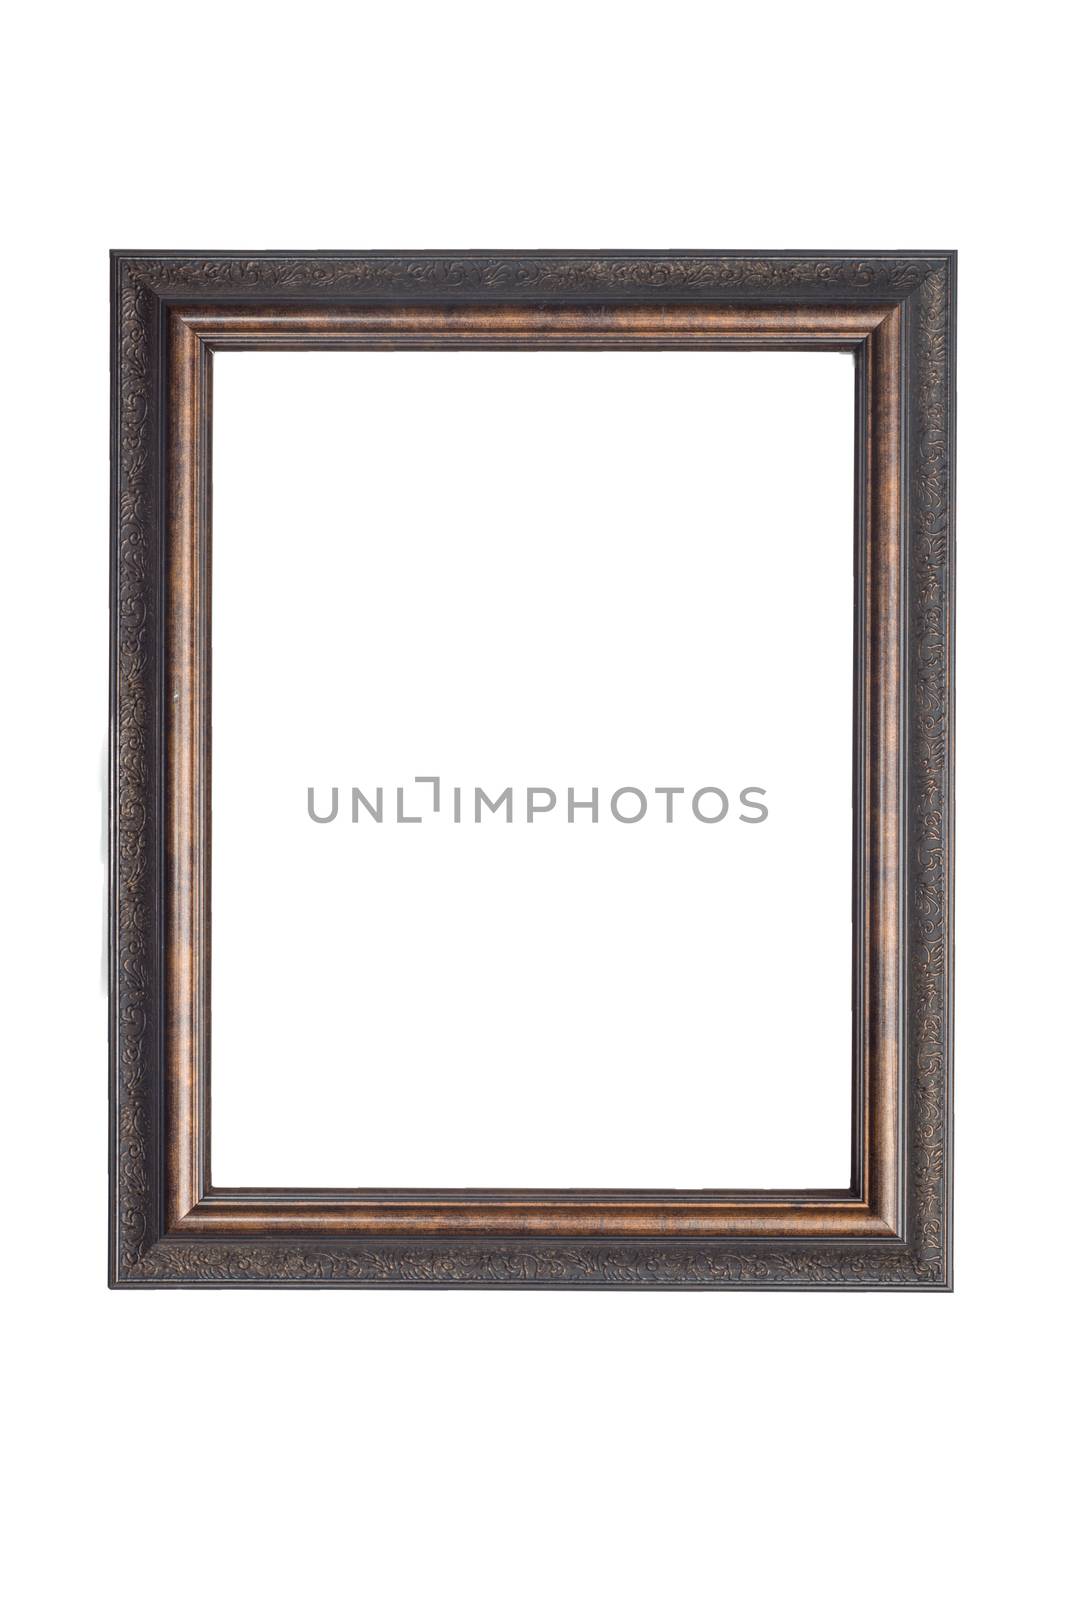 pictrue frame carved in wood isolated over white background